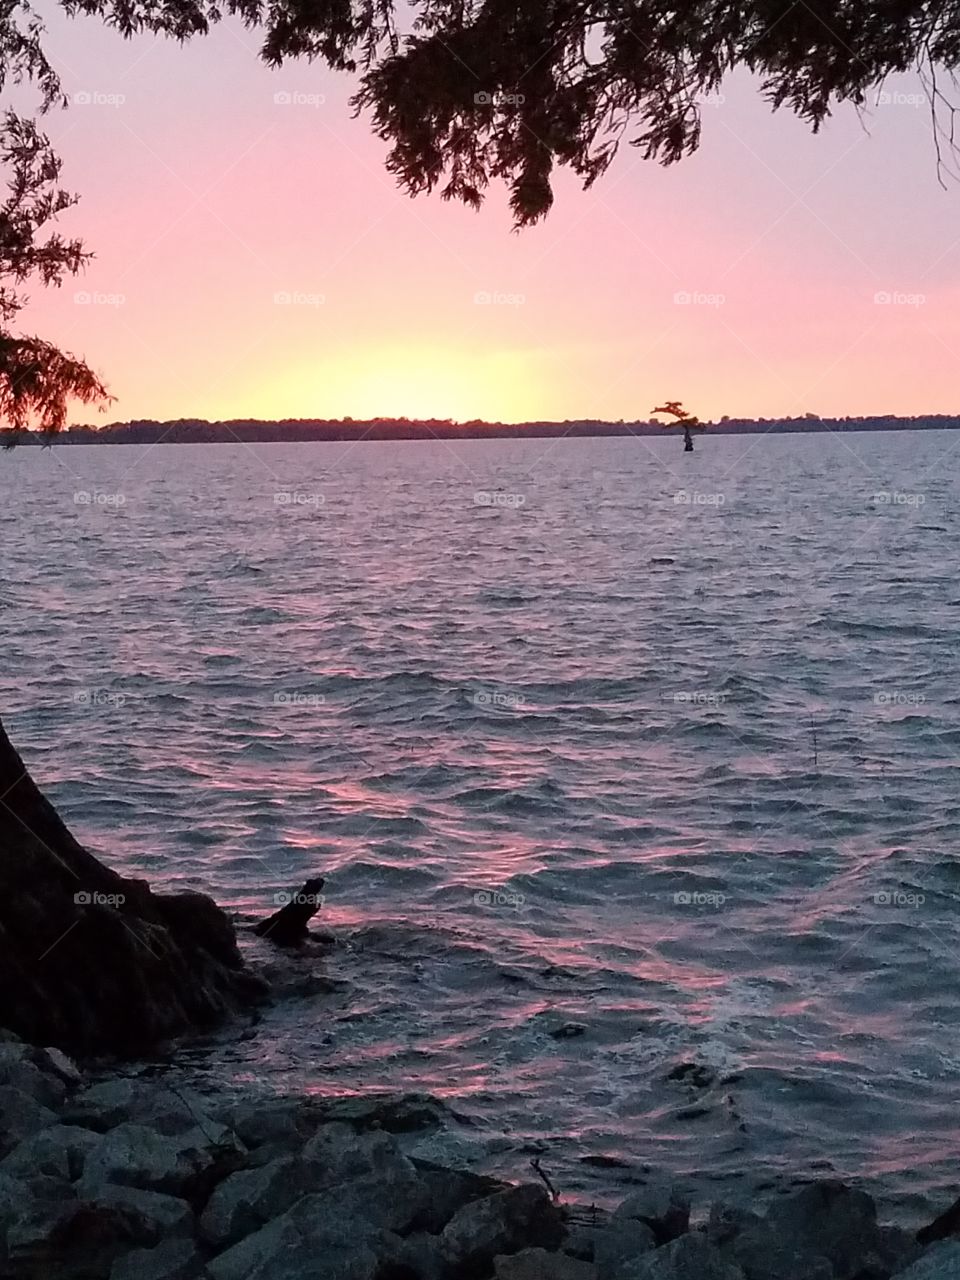 beautiful sunset on reelfoot lake in Tennessee